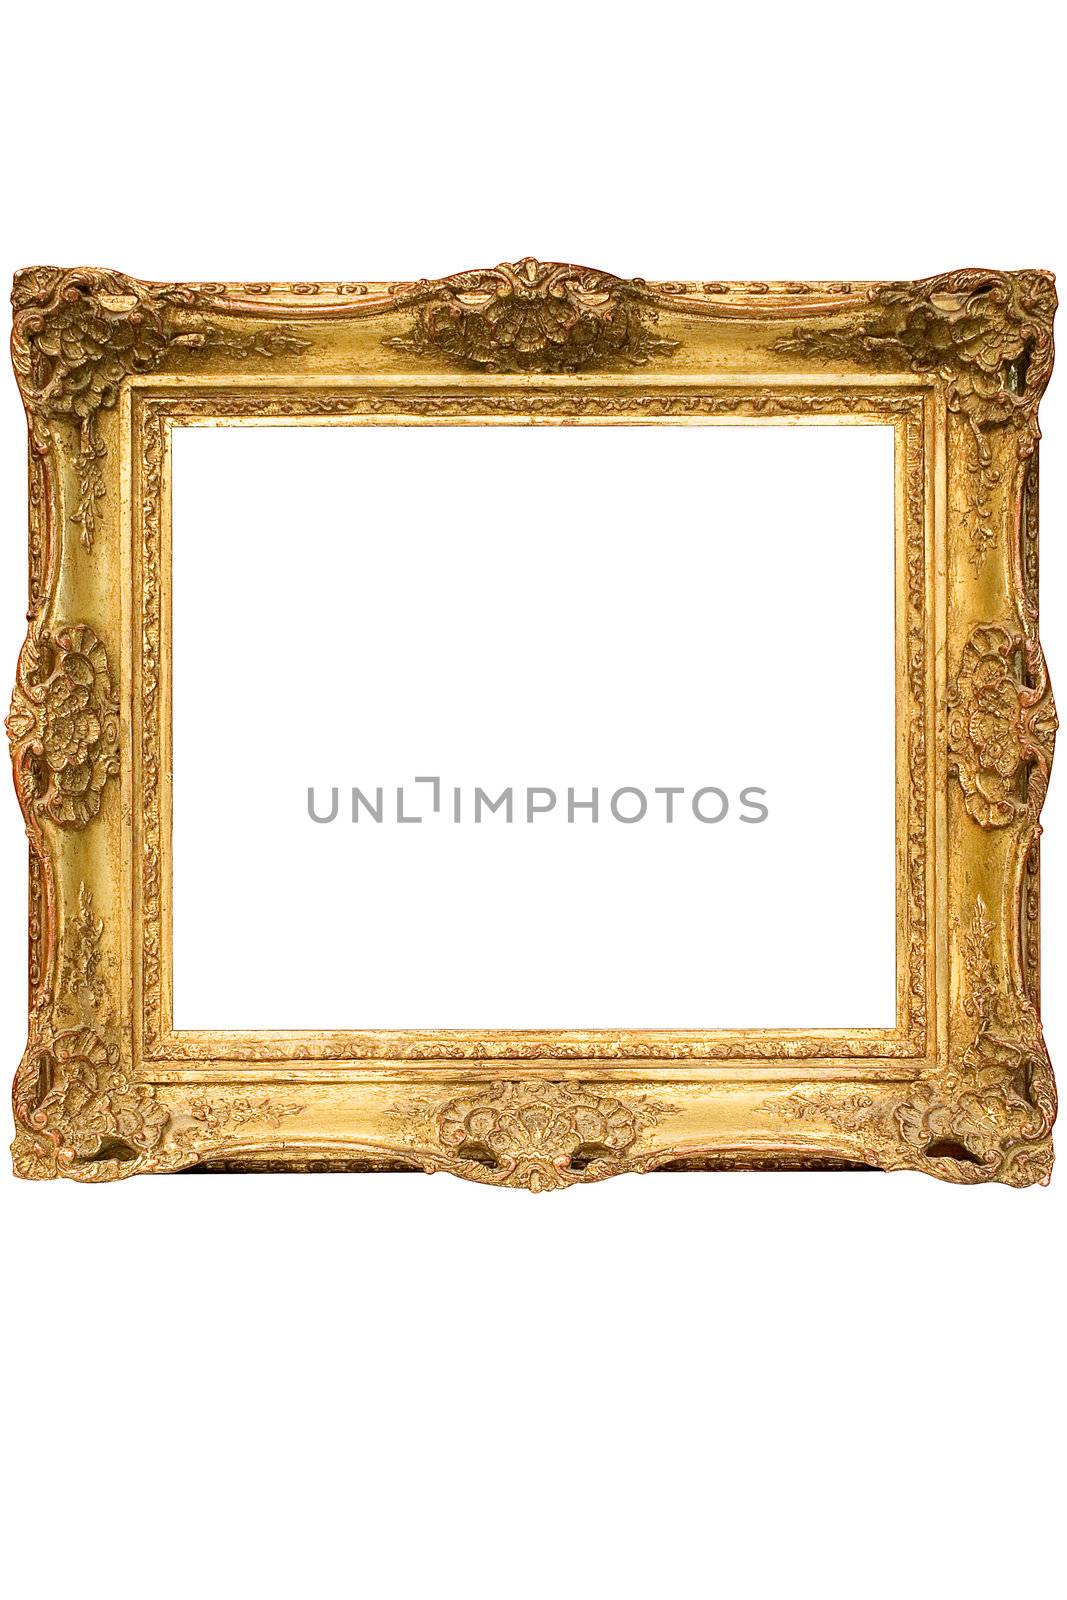 Gold Plated Picture Frame with Clipping Path by winterling